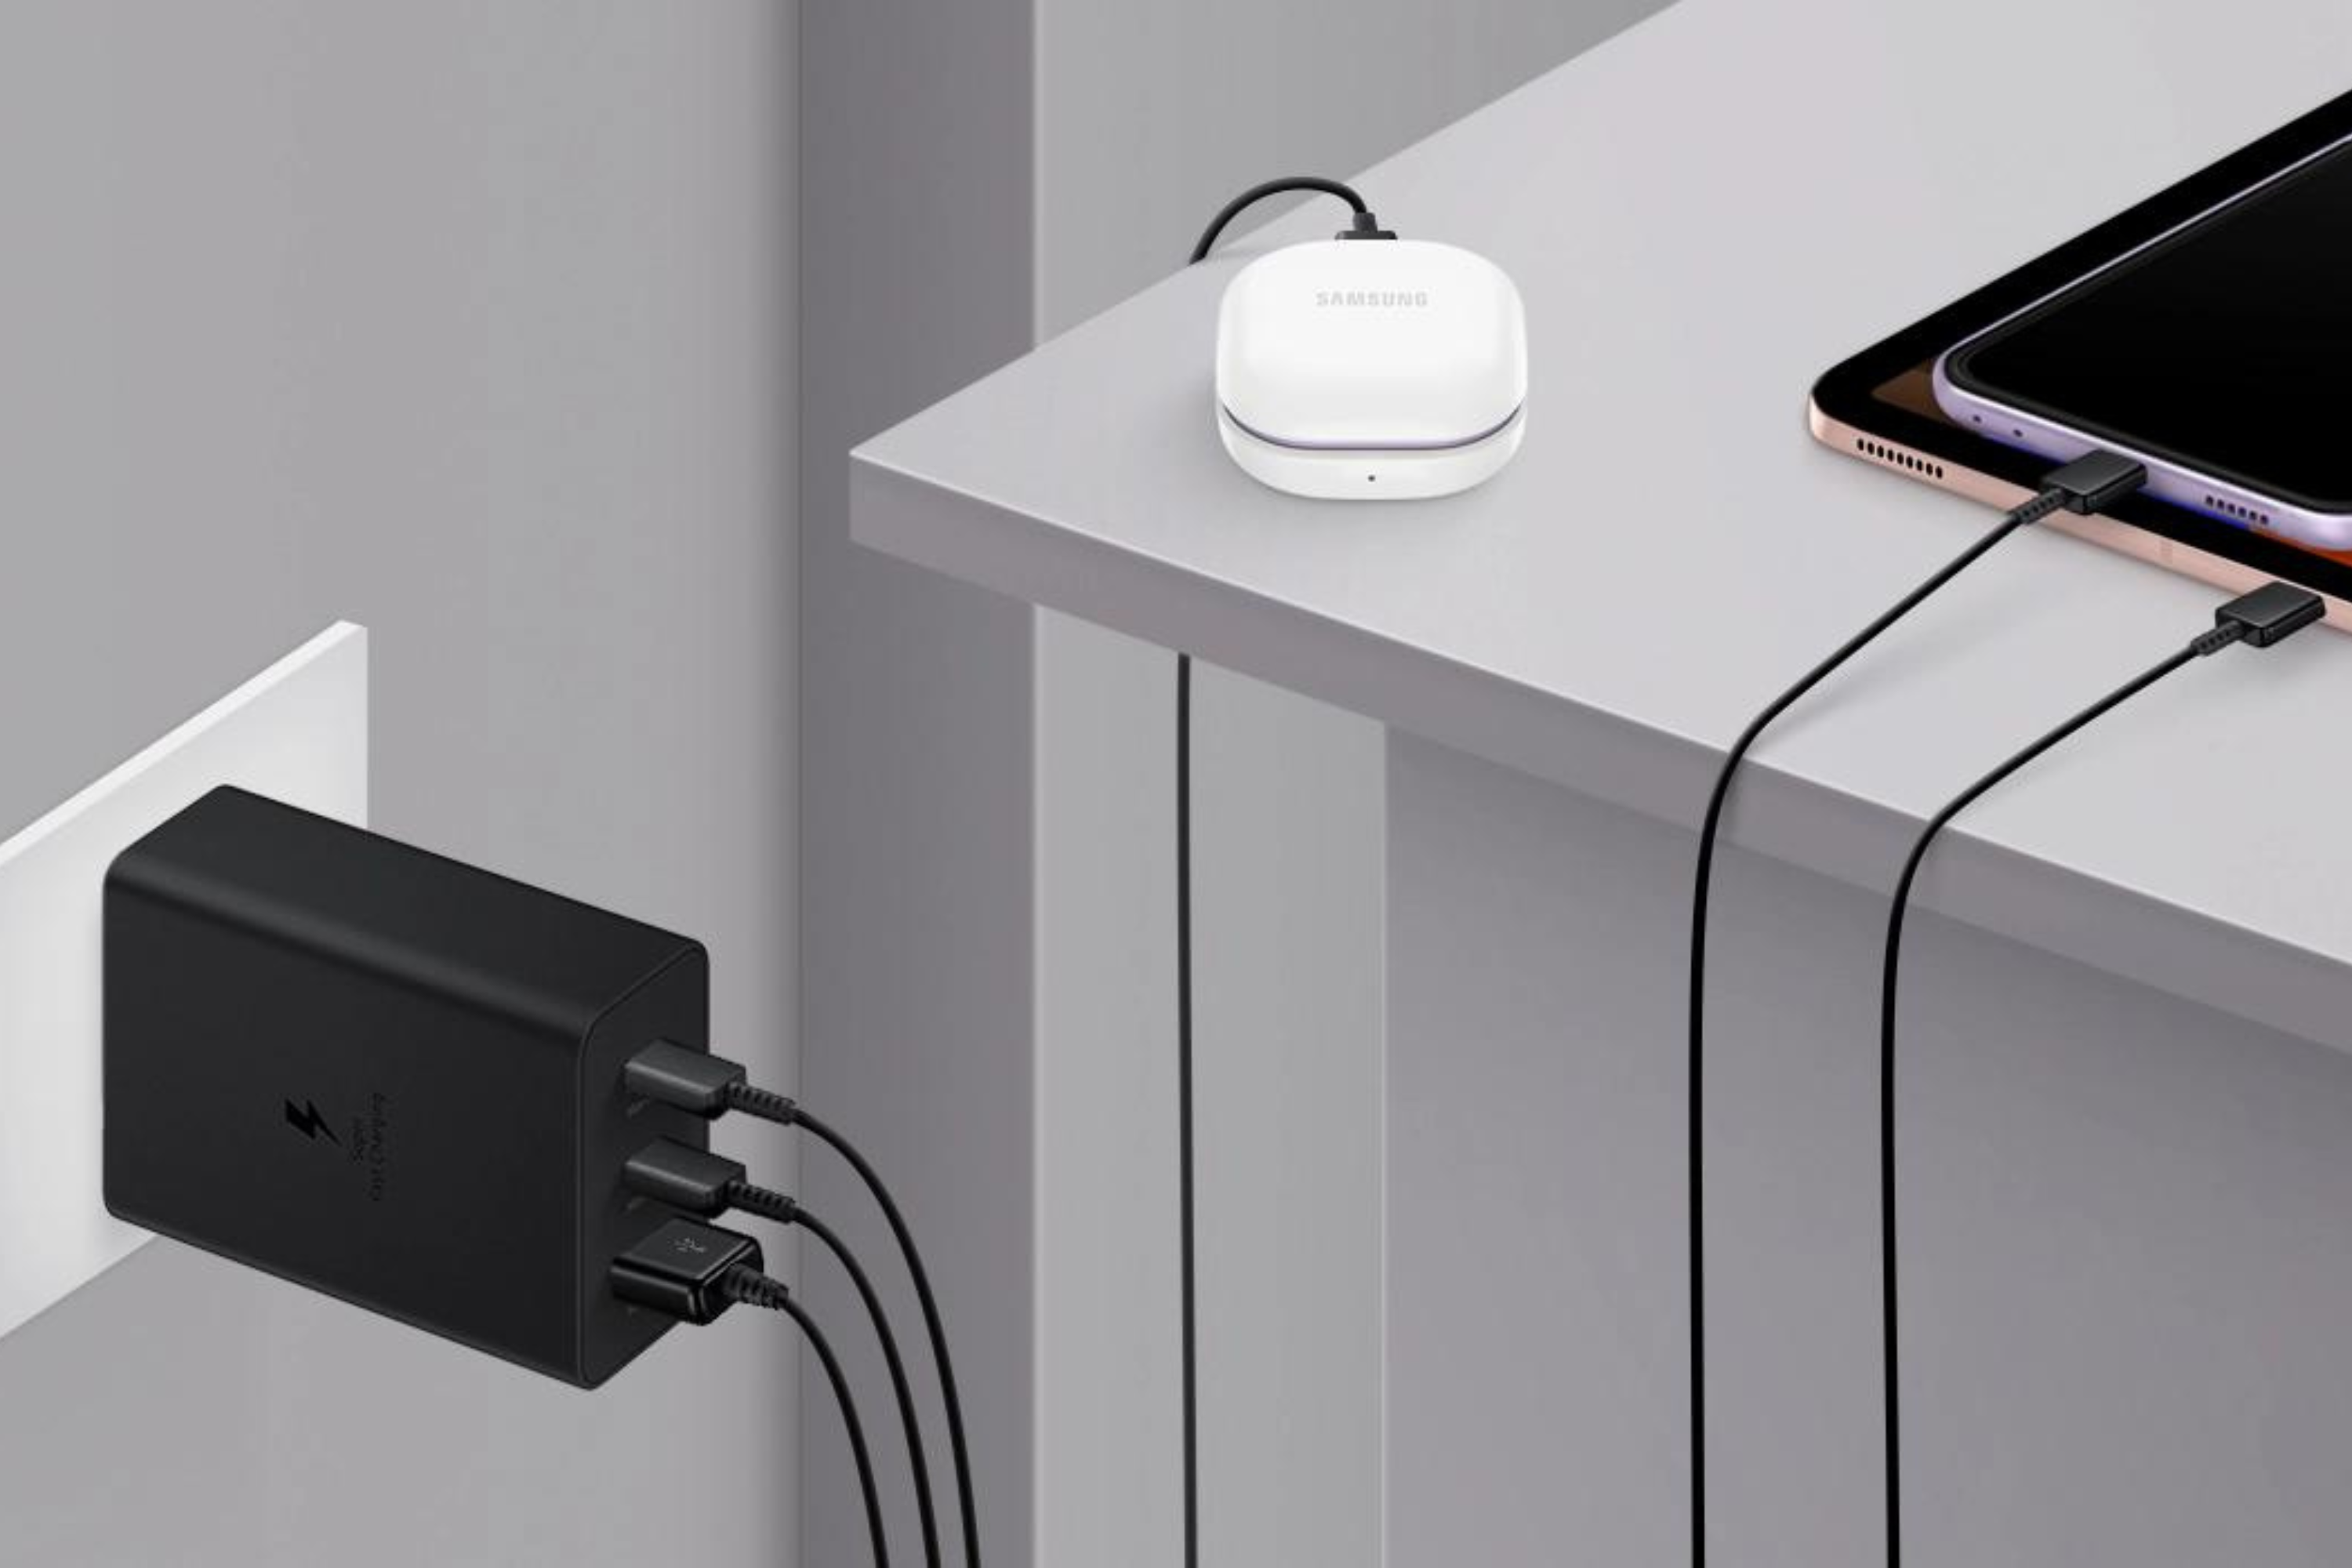 Samsung 3-Port Super Fast Charging Wall Charger plugged into devices